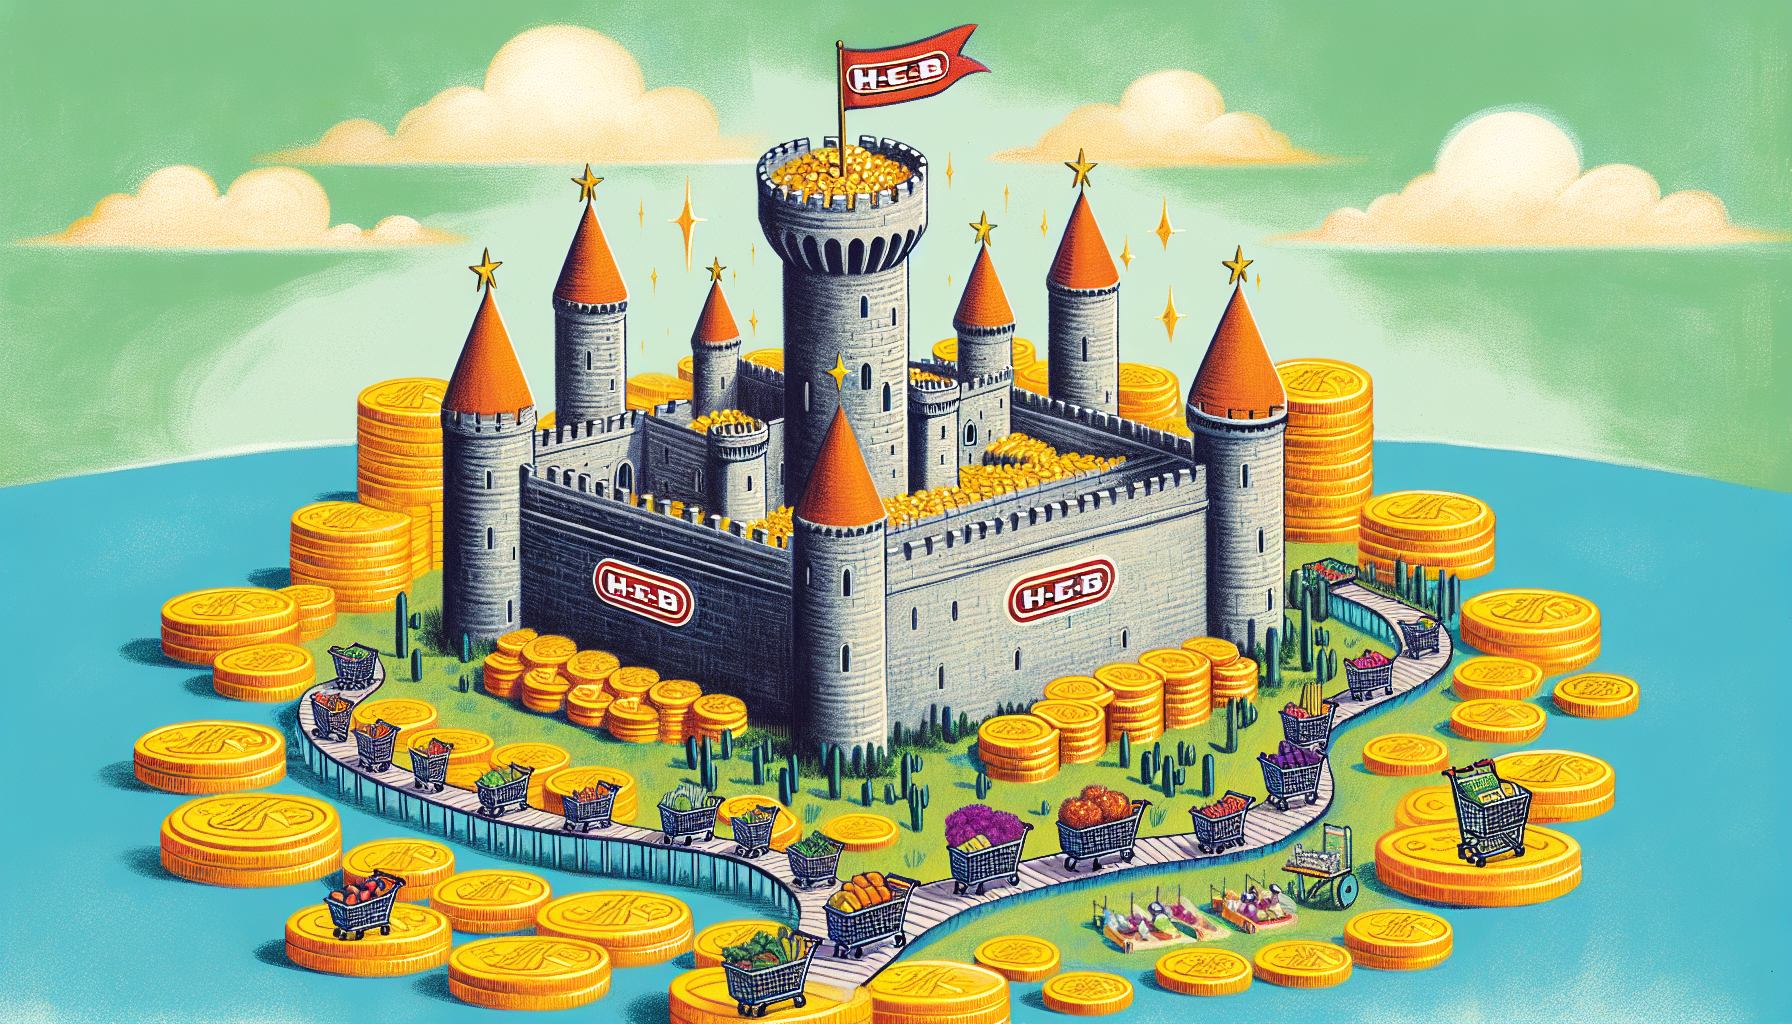 Artistic depiction of H-E-B's robust financial performance and market position